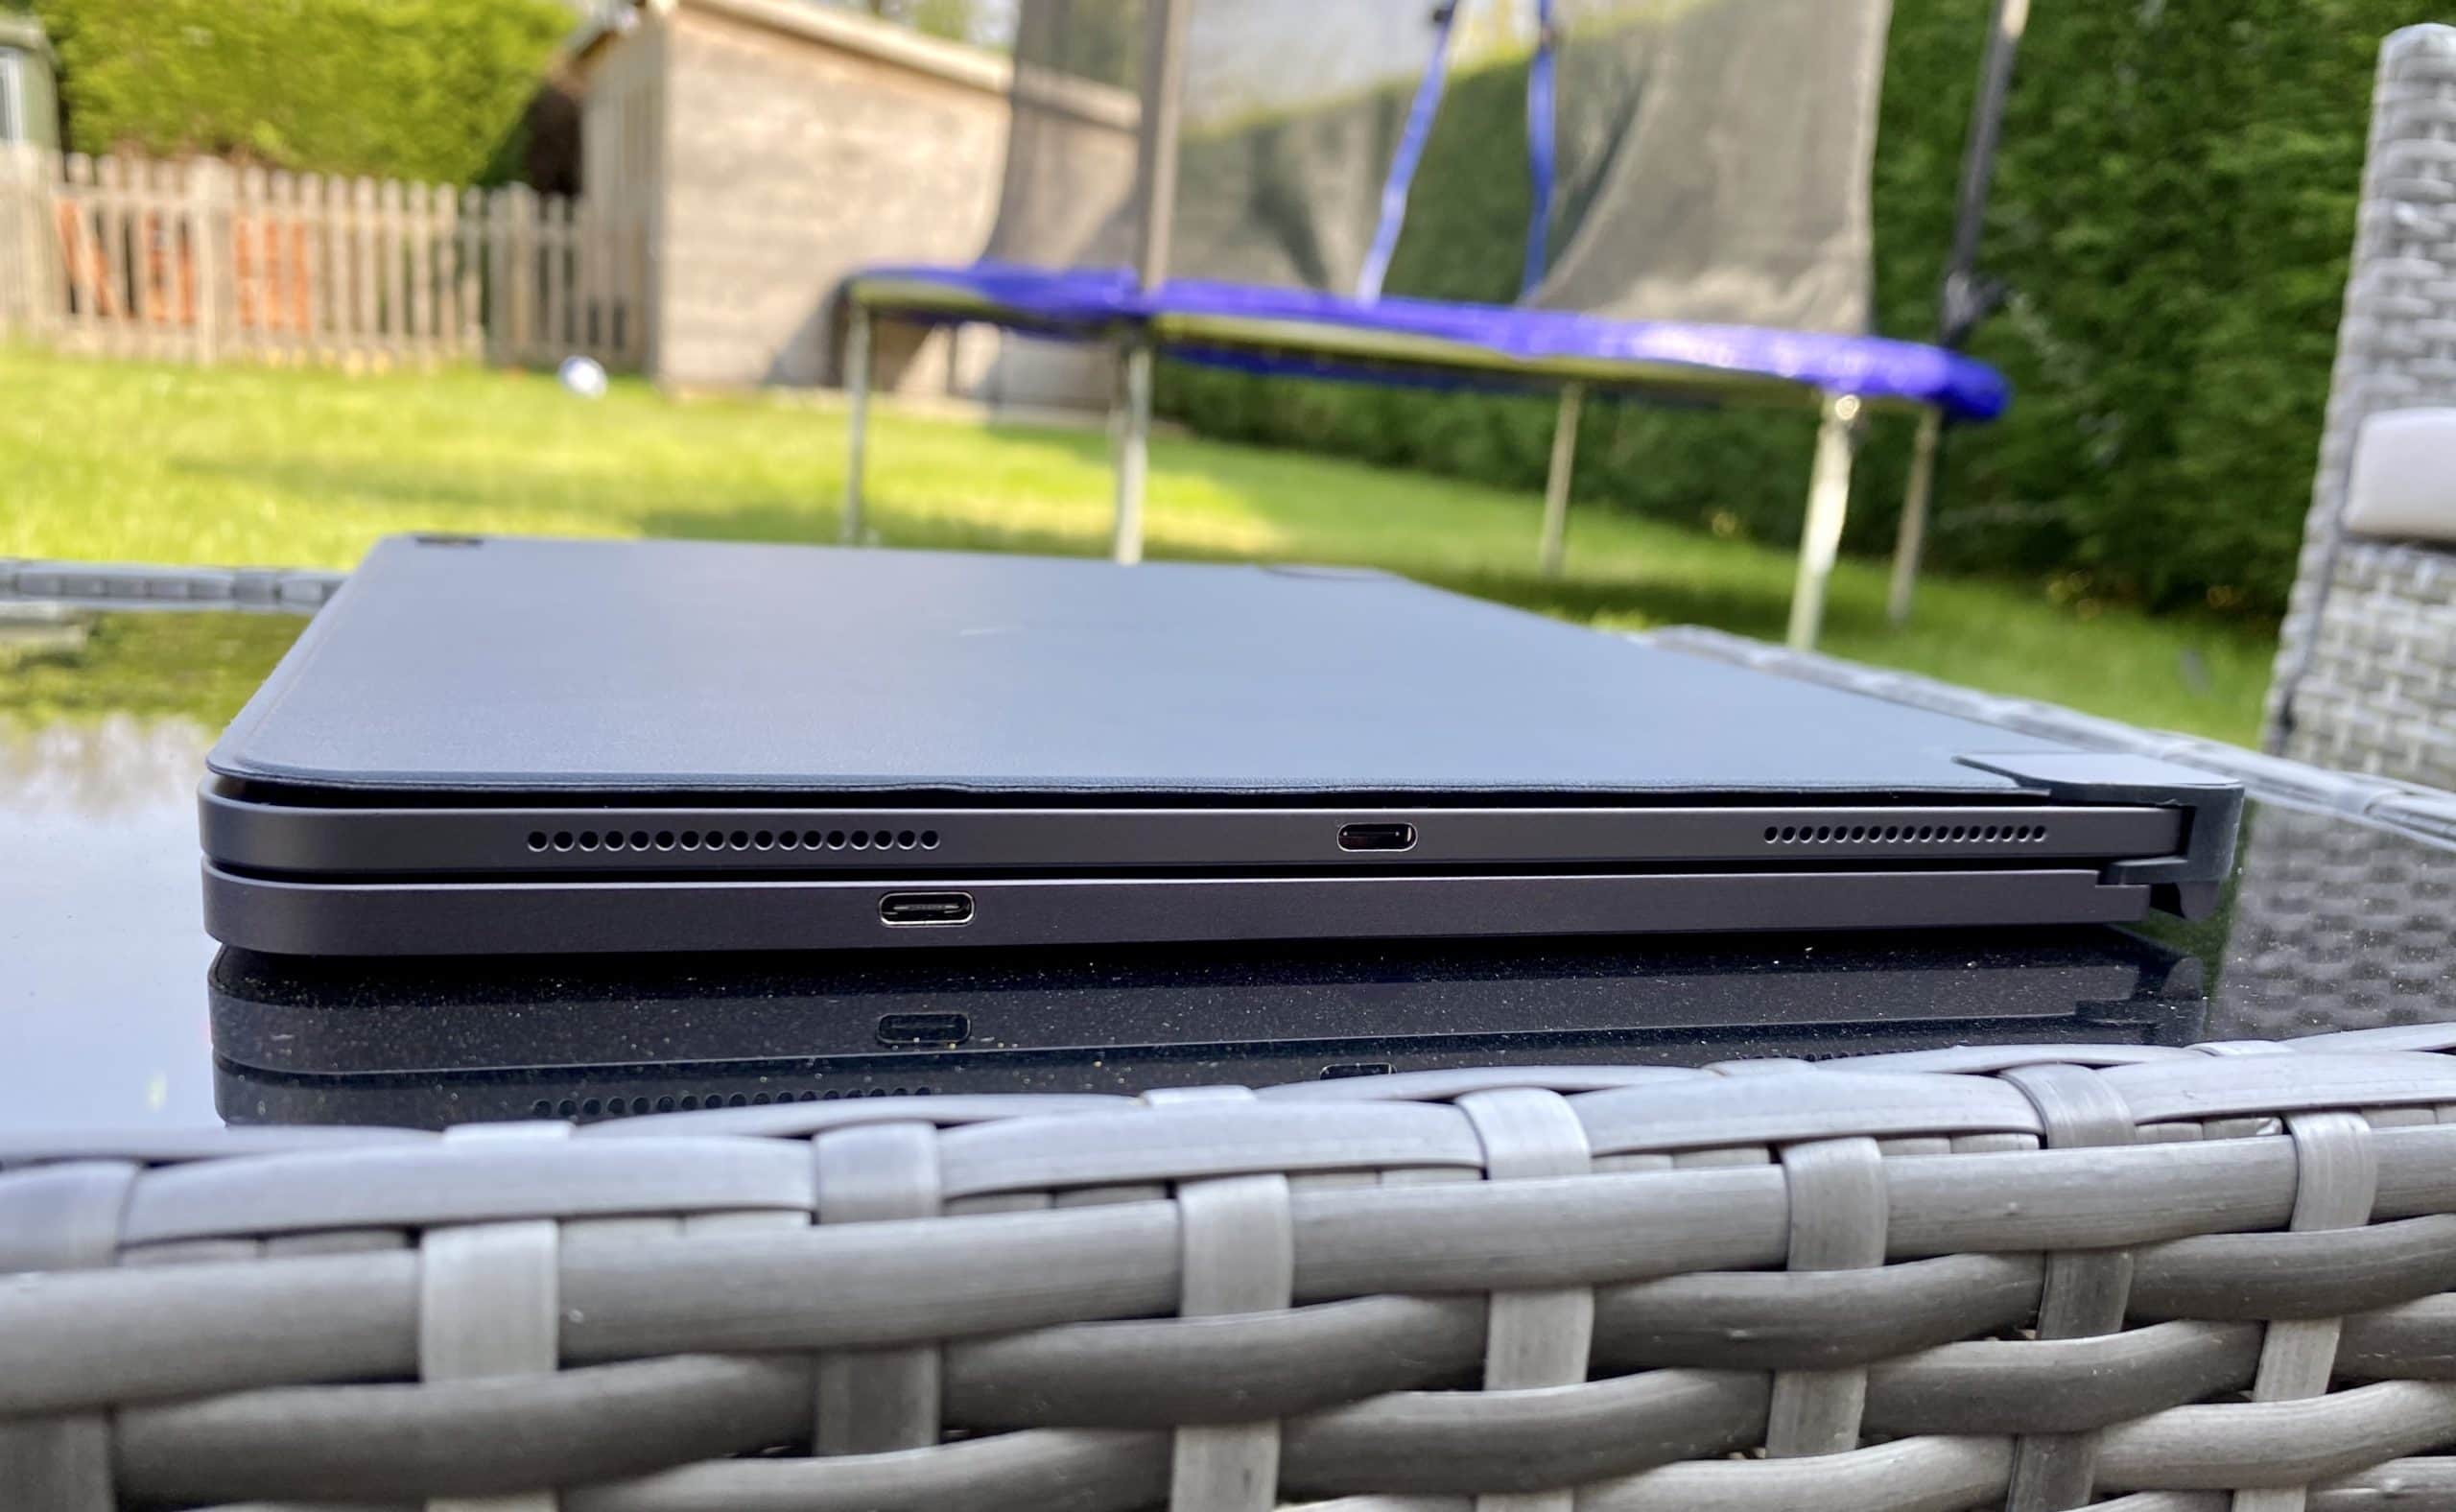 The Brydge Pro+ trackpad case measures about the same thickness as iPad Pro